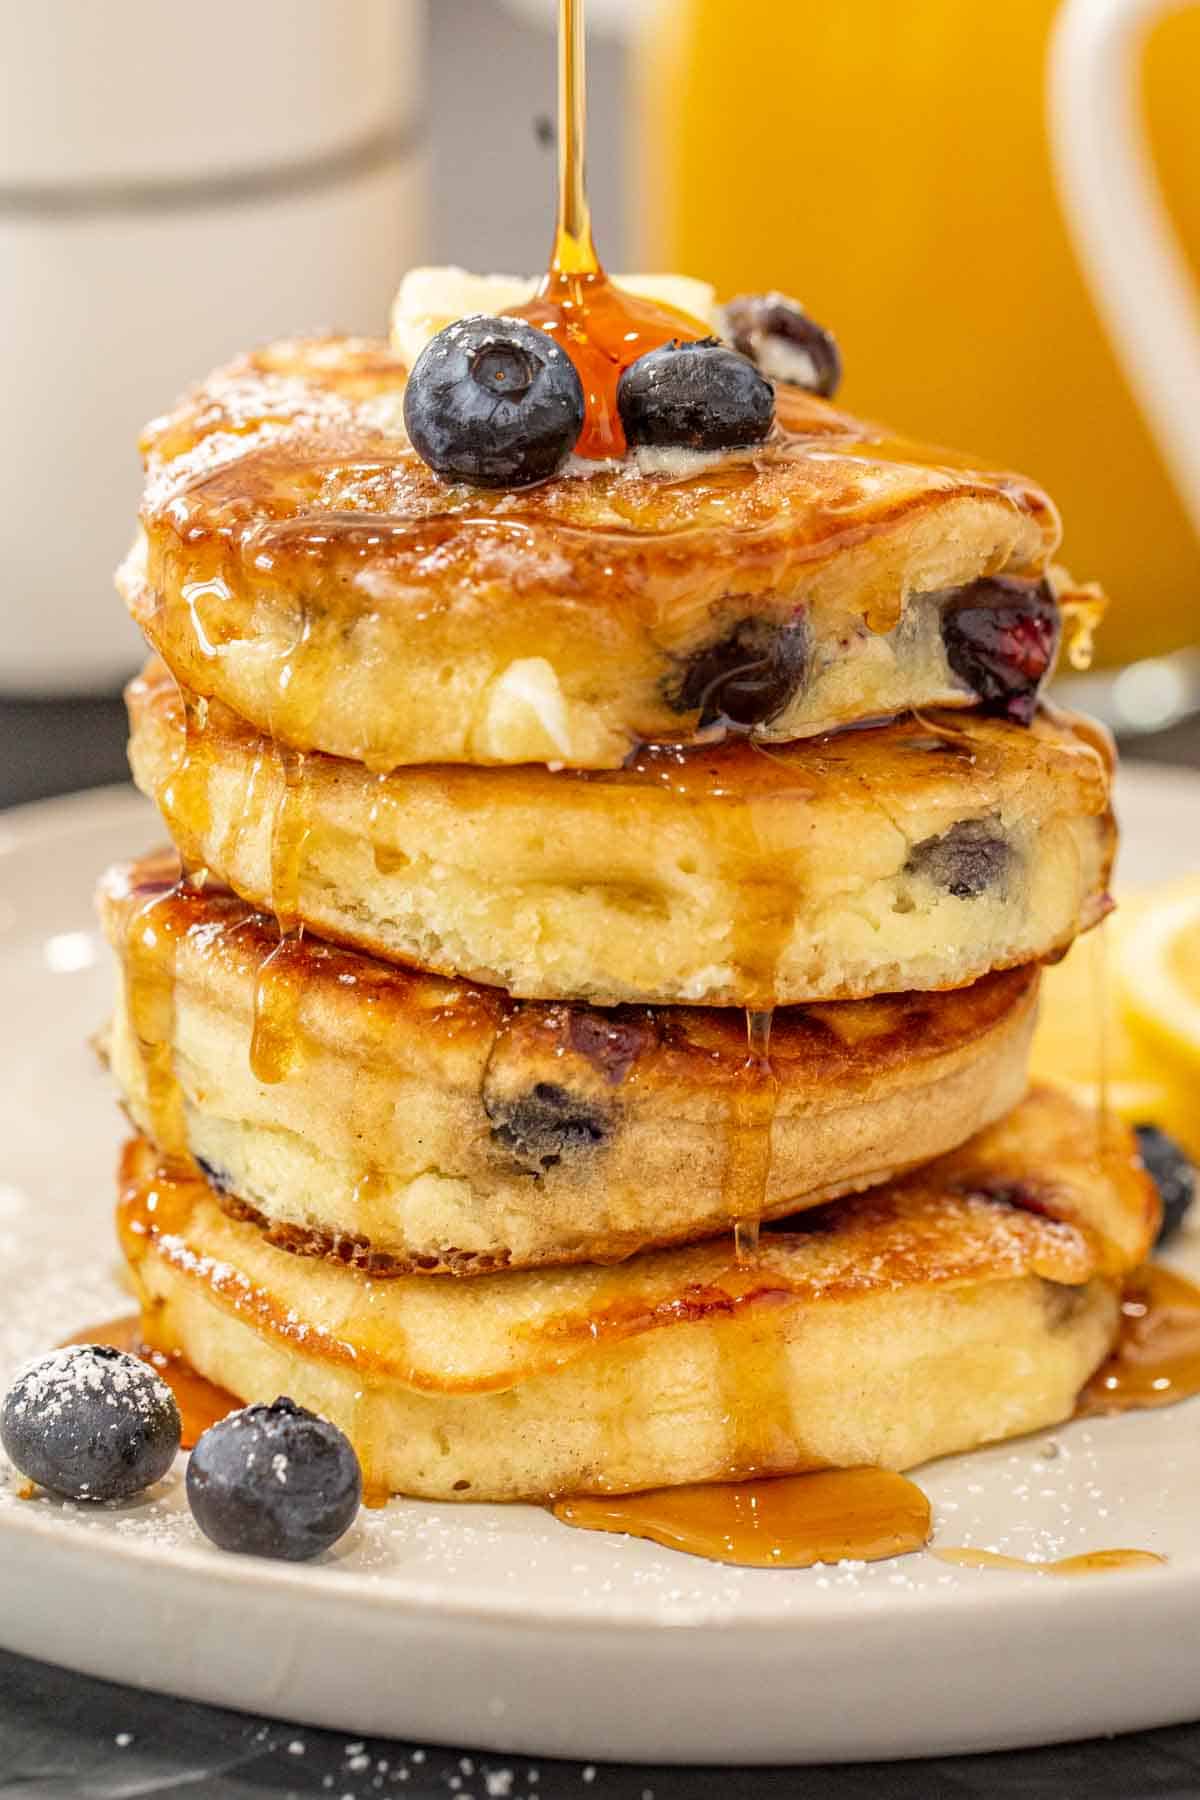 Maple syrup being drizzled on a stack of blueberry pancakes.